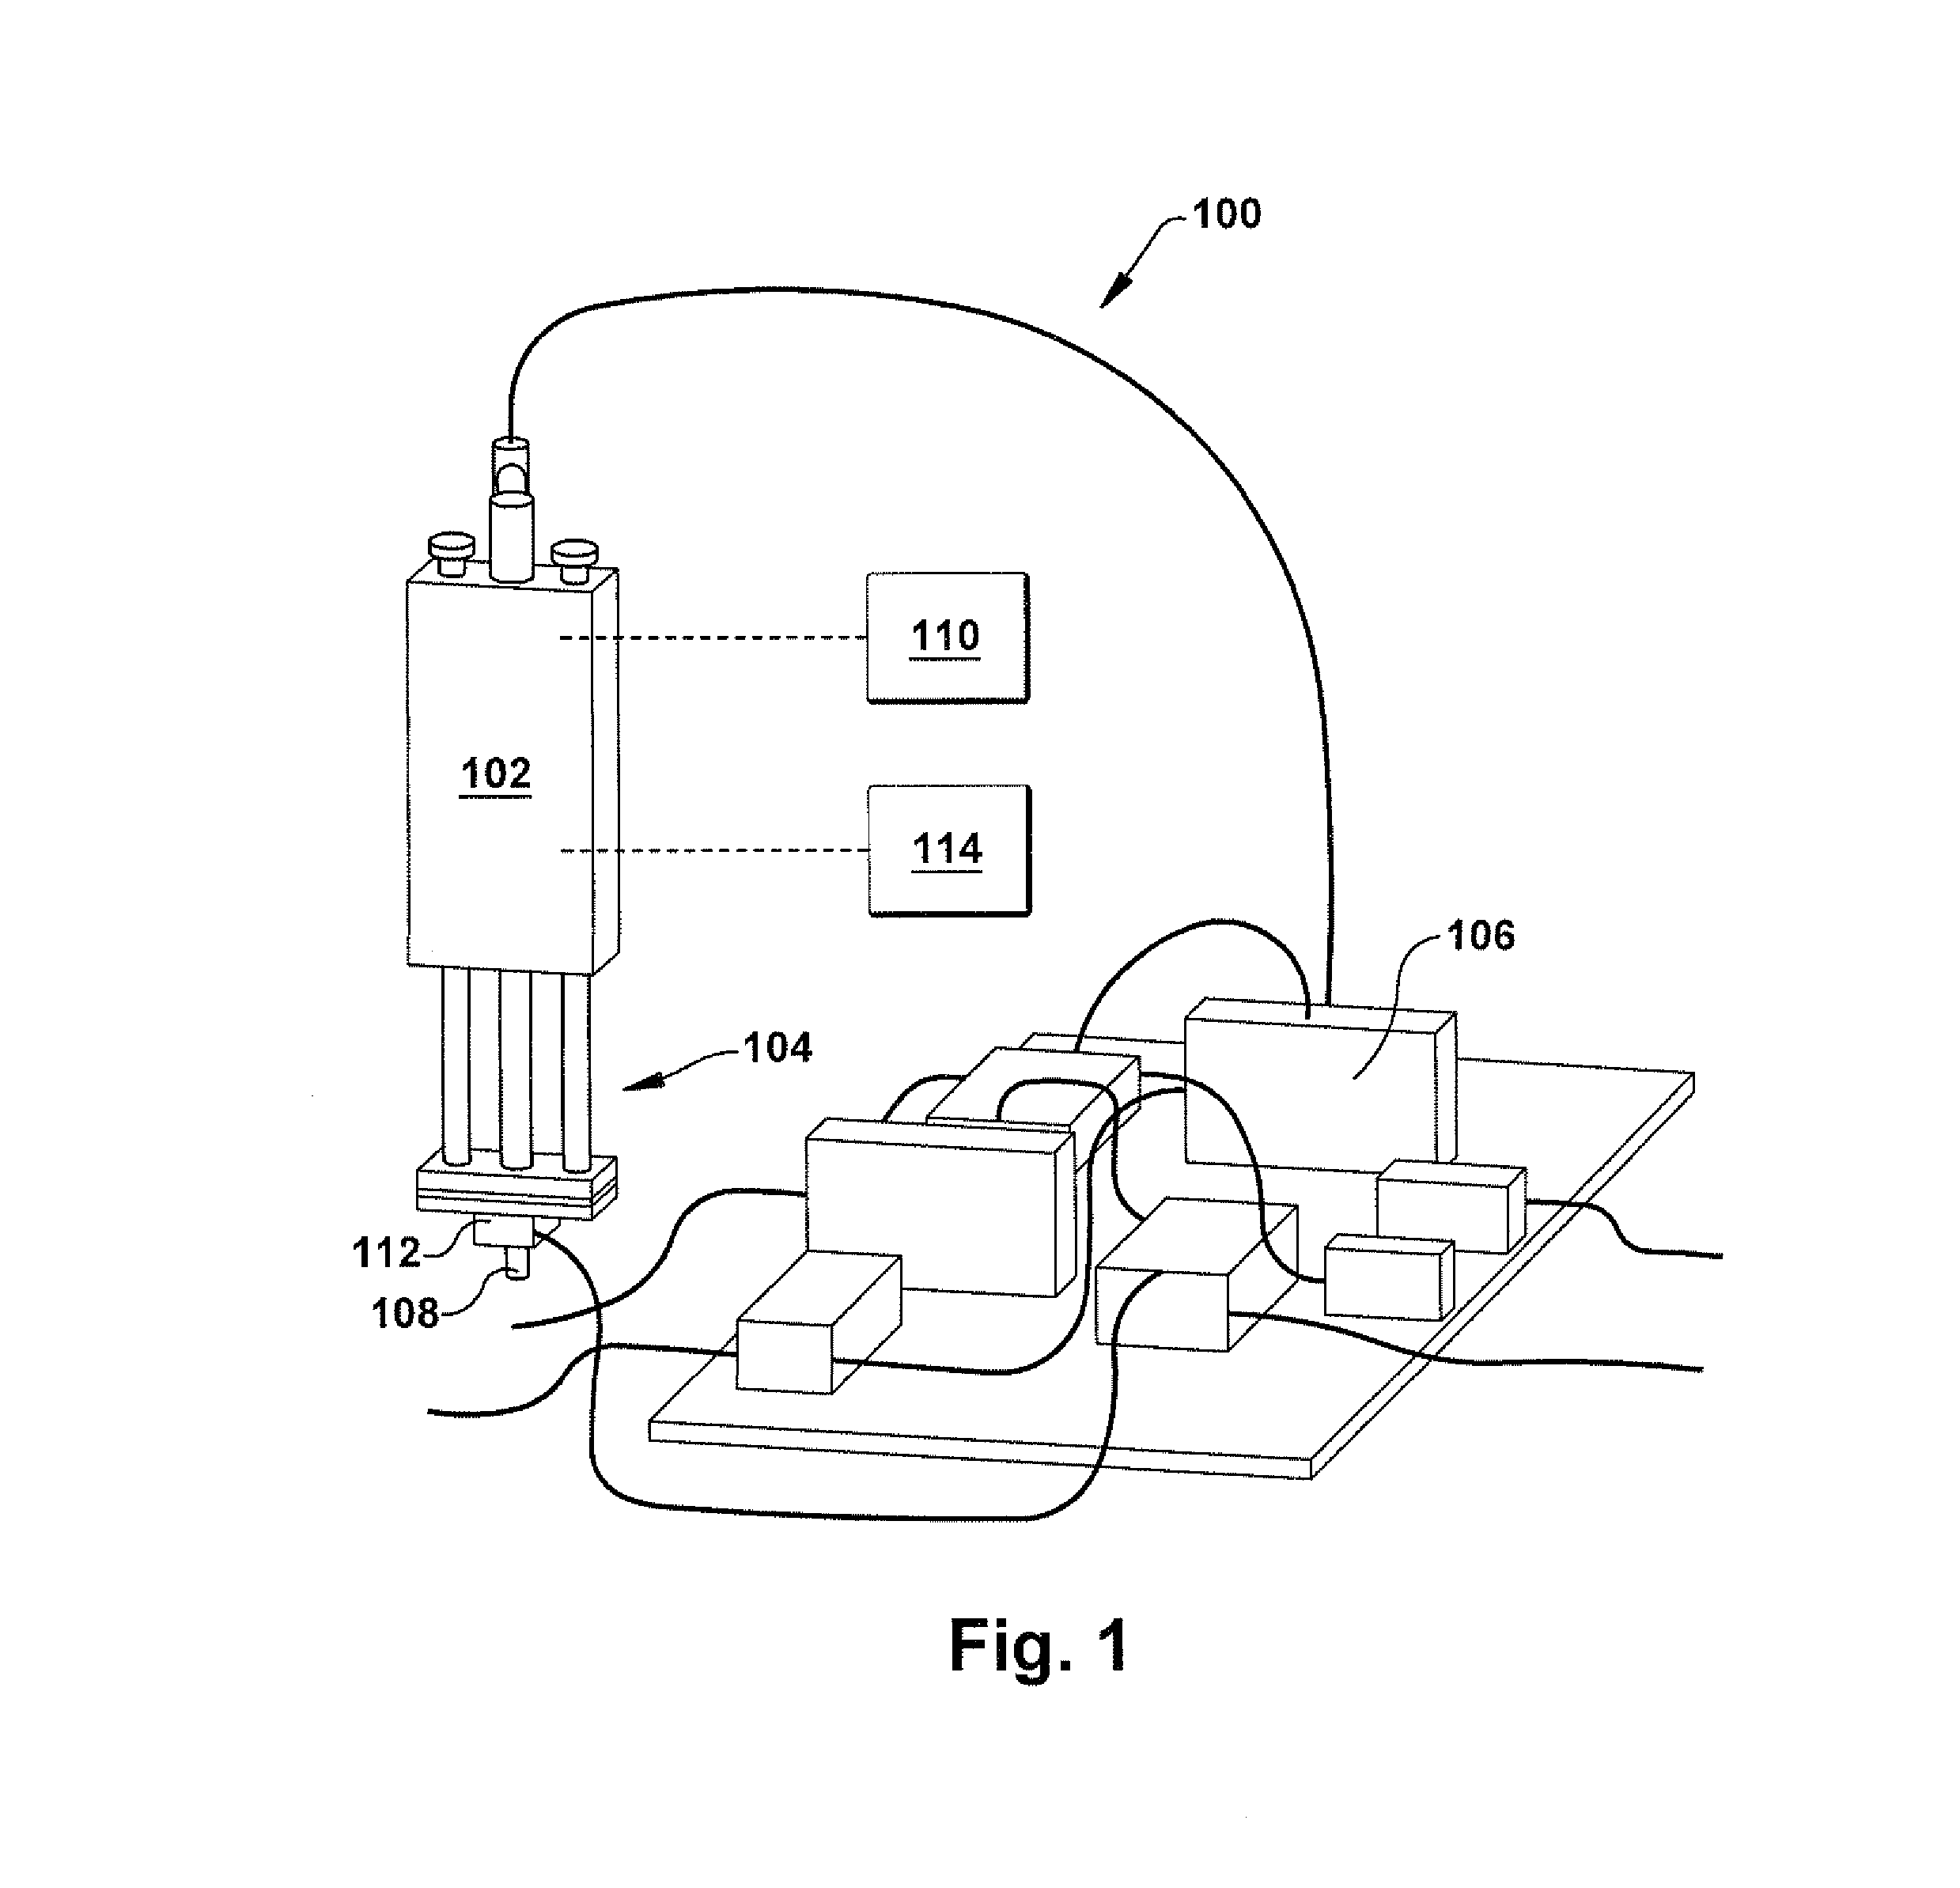 Apparatus and method for exerting force on a subject tissue